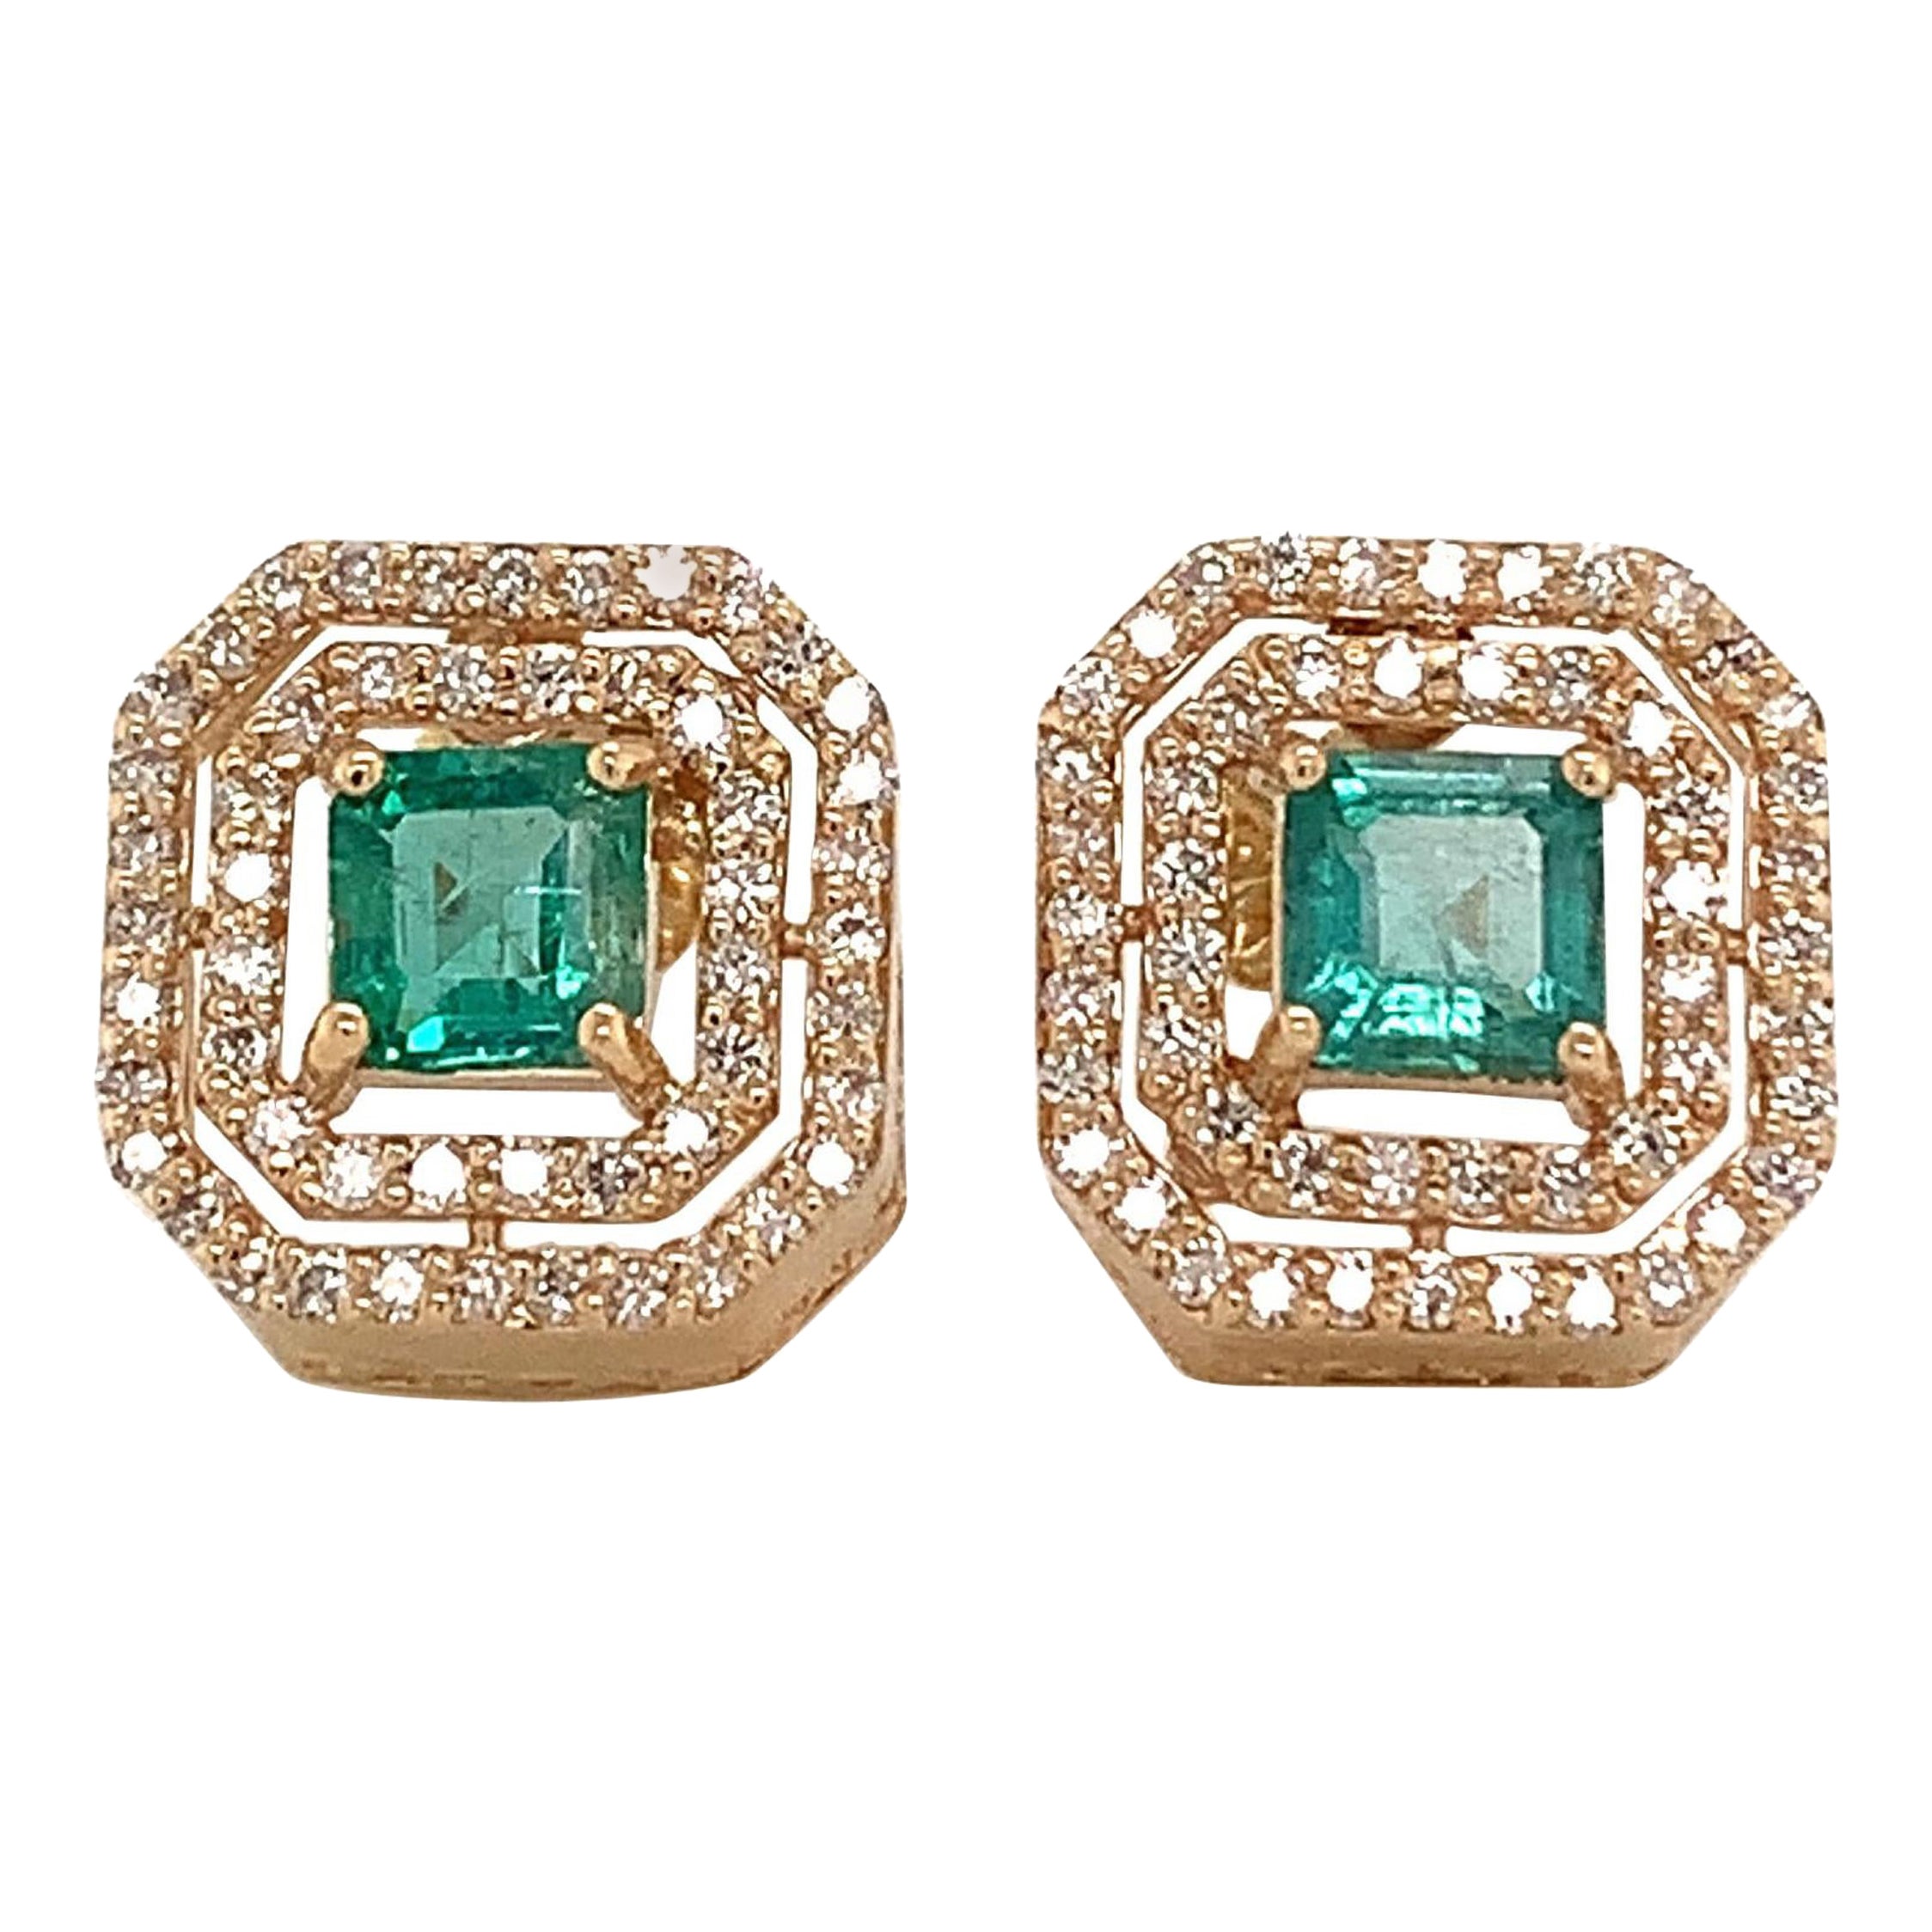 Natural Emerald Diamond Earrings 14k Gold 1.52 TCW Certified For Sale